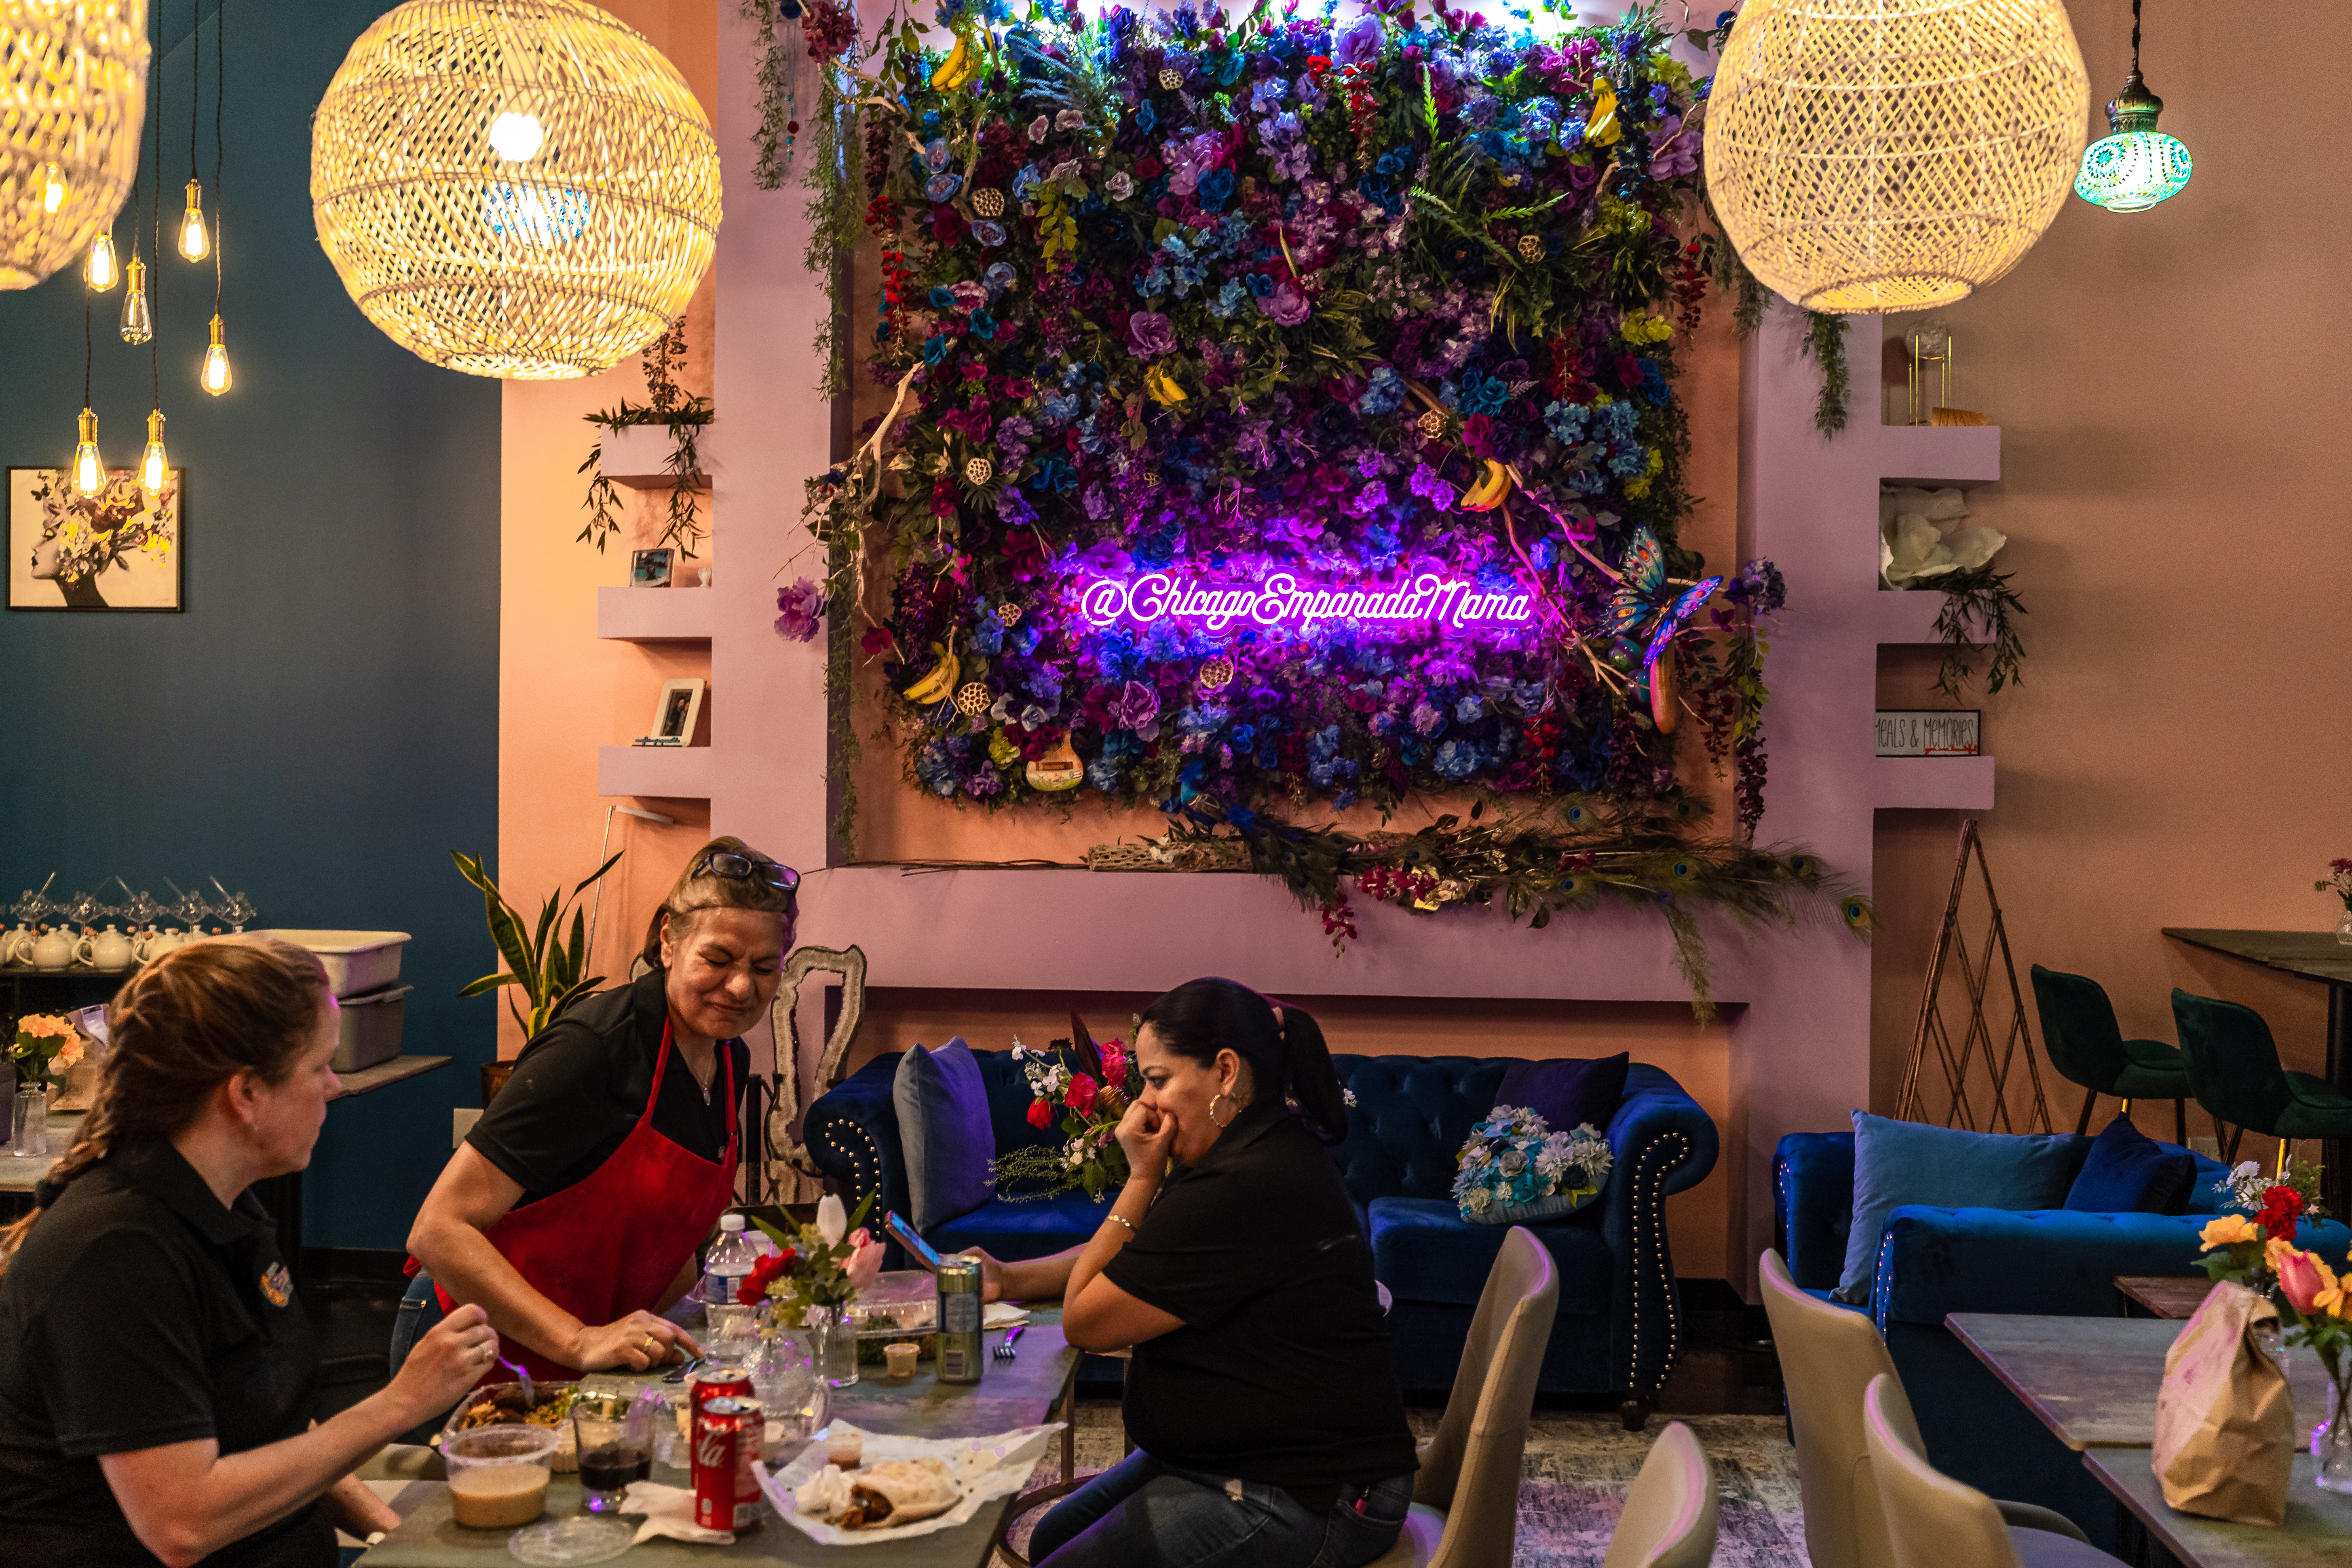 A section of a restaurant space is decorated with a purple neon sign that reads “@ChicagoEmpanadaMama.”